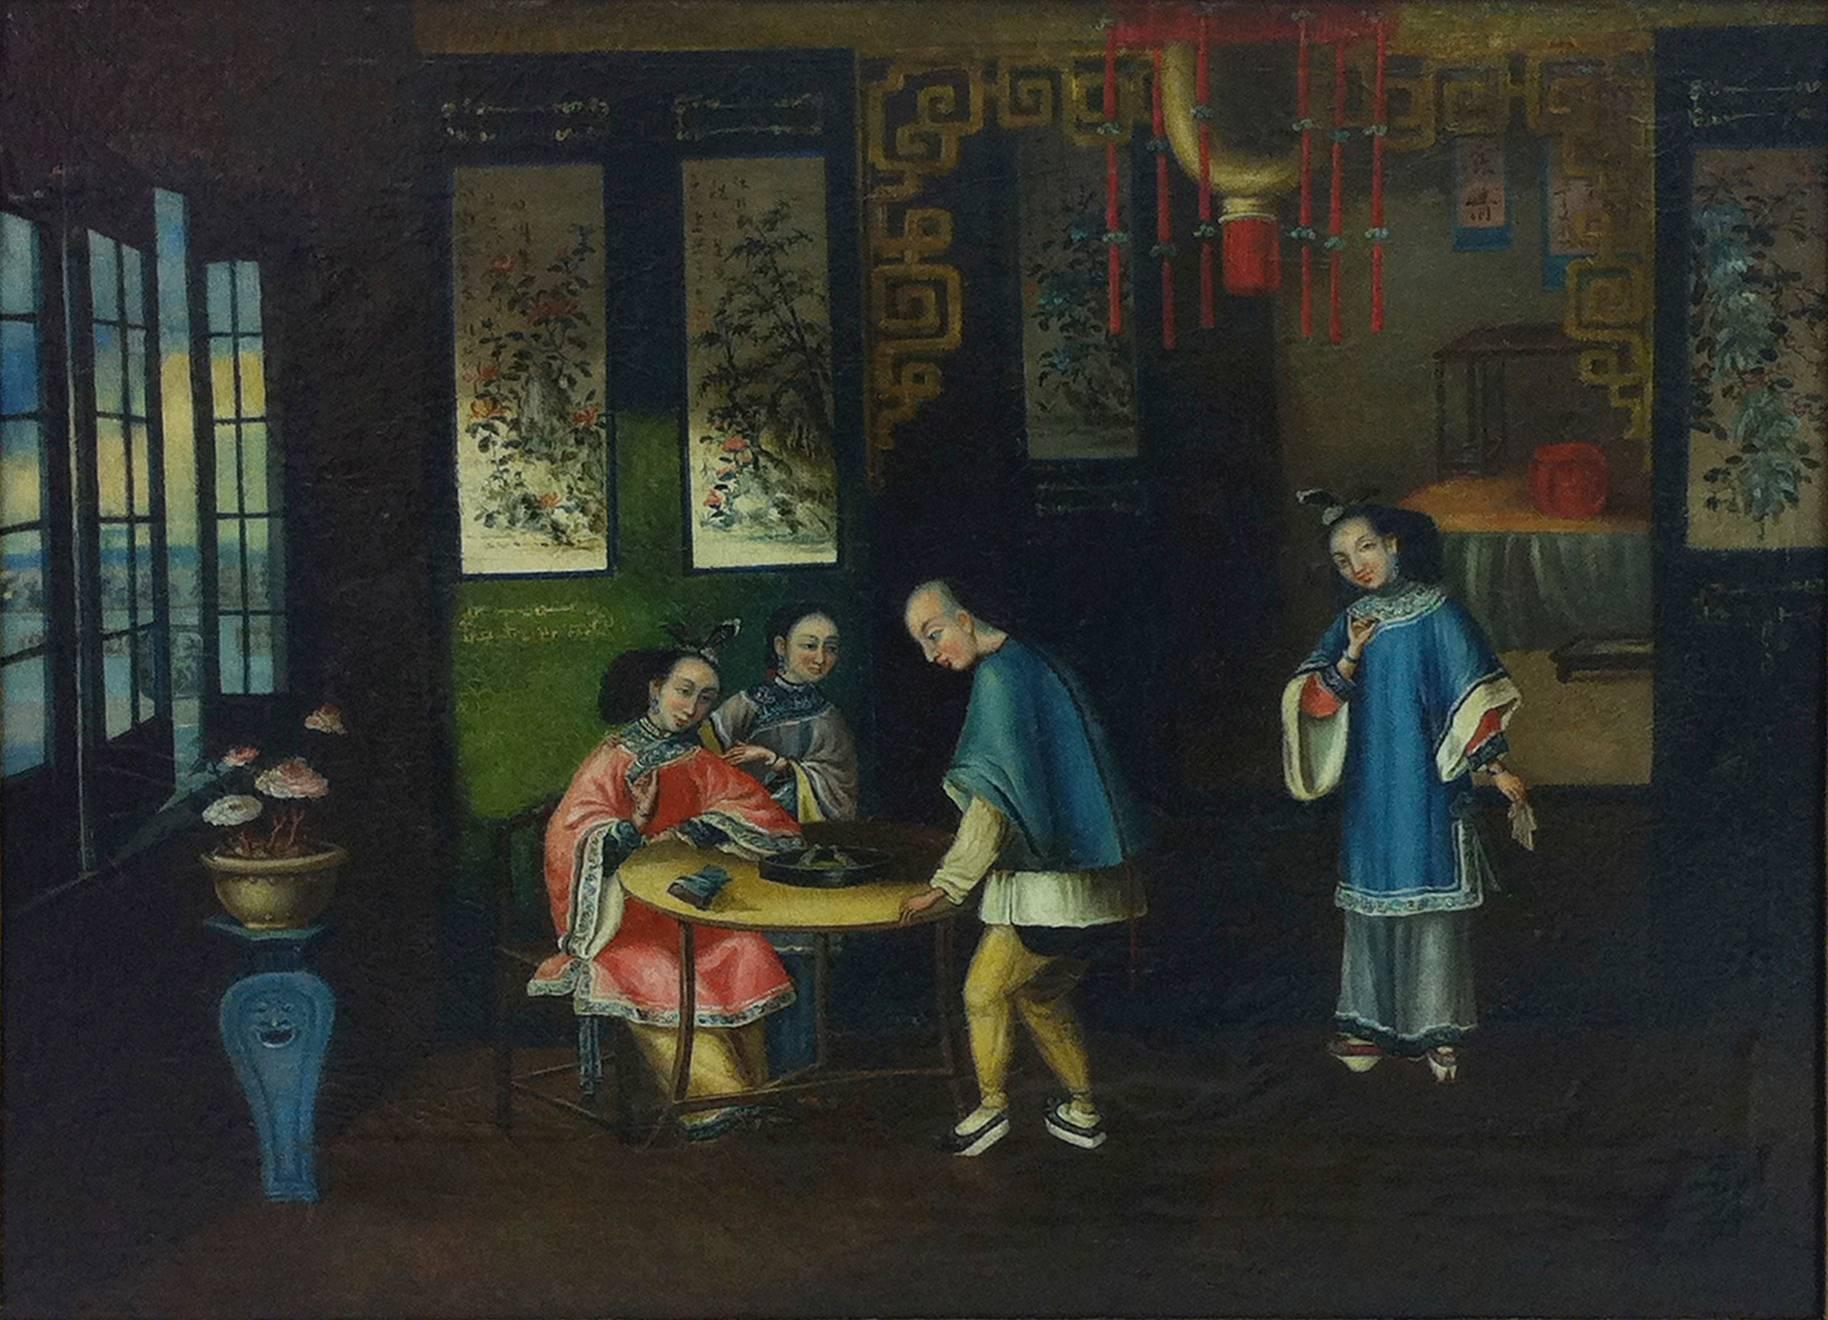 "Fight of birds" Chinese interior scene, 19th century.
Oil on canvas, mounted on panel.

 